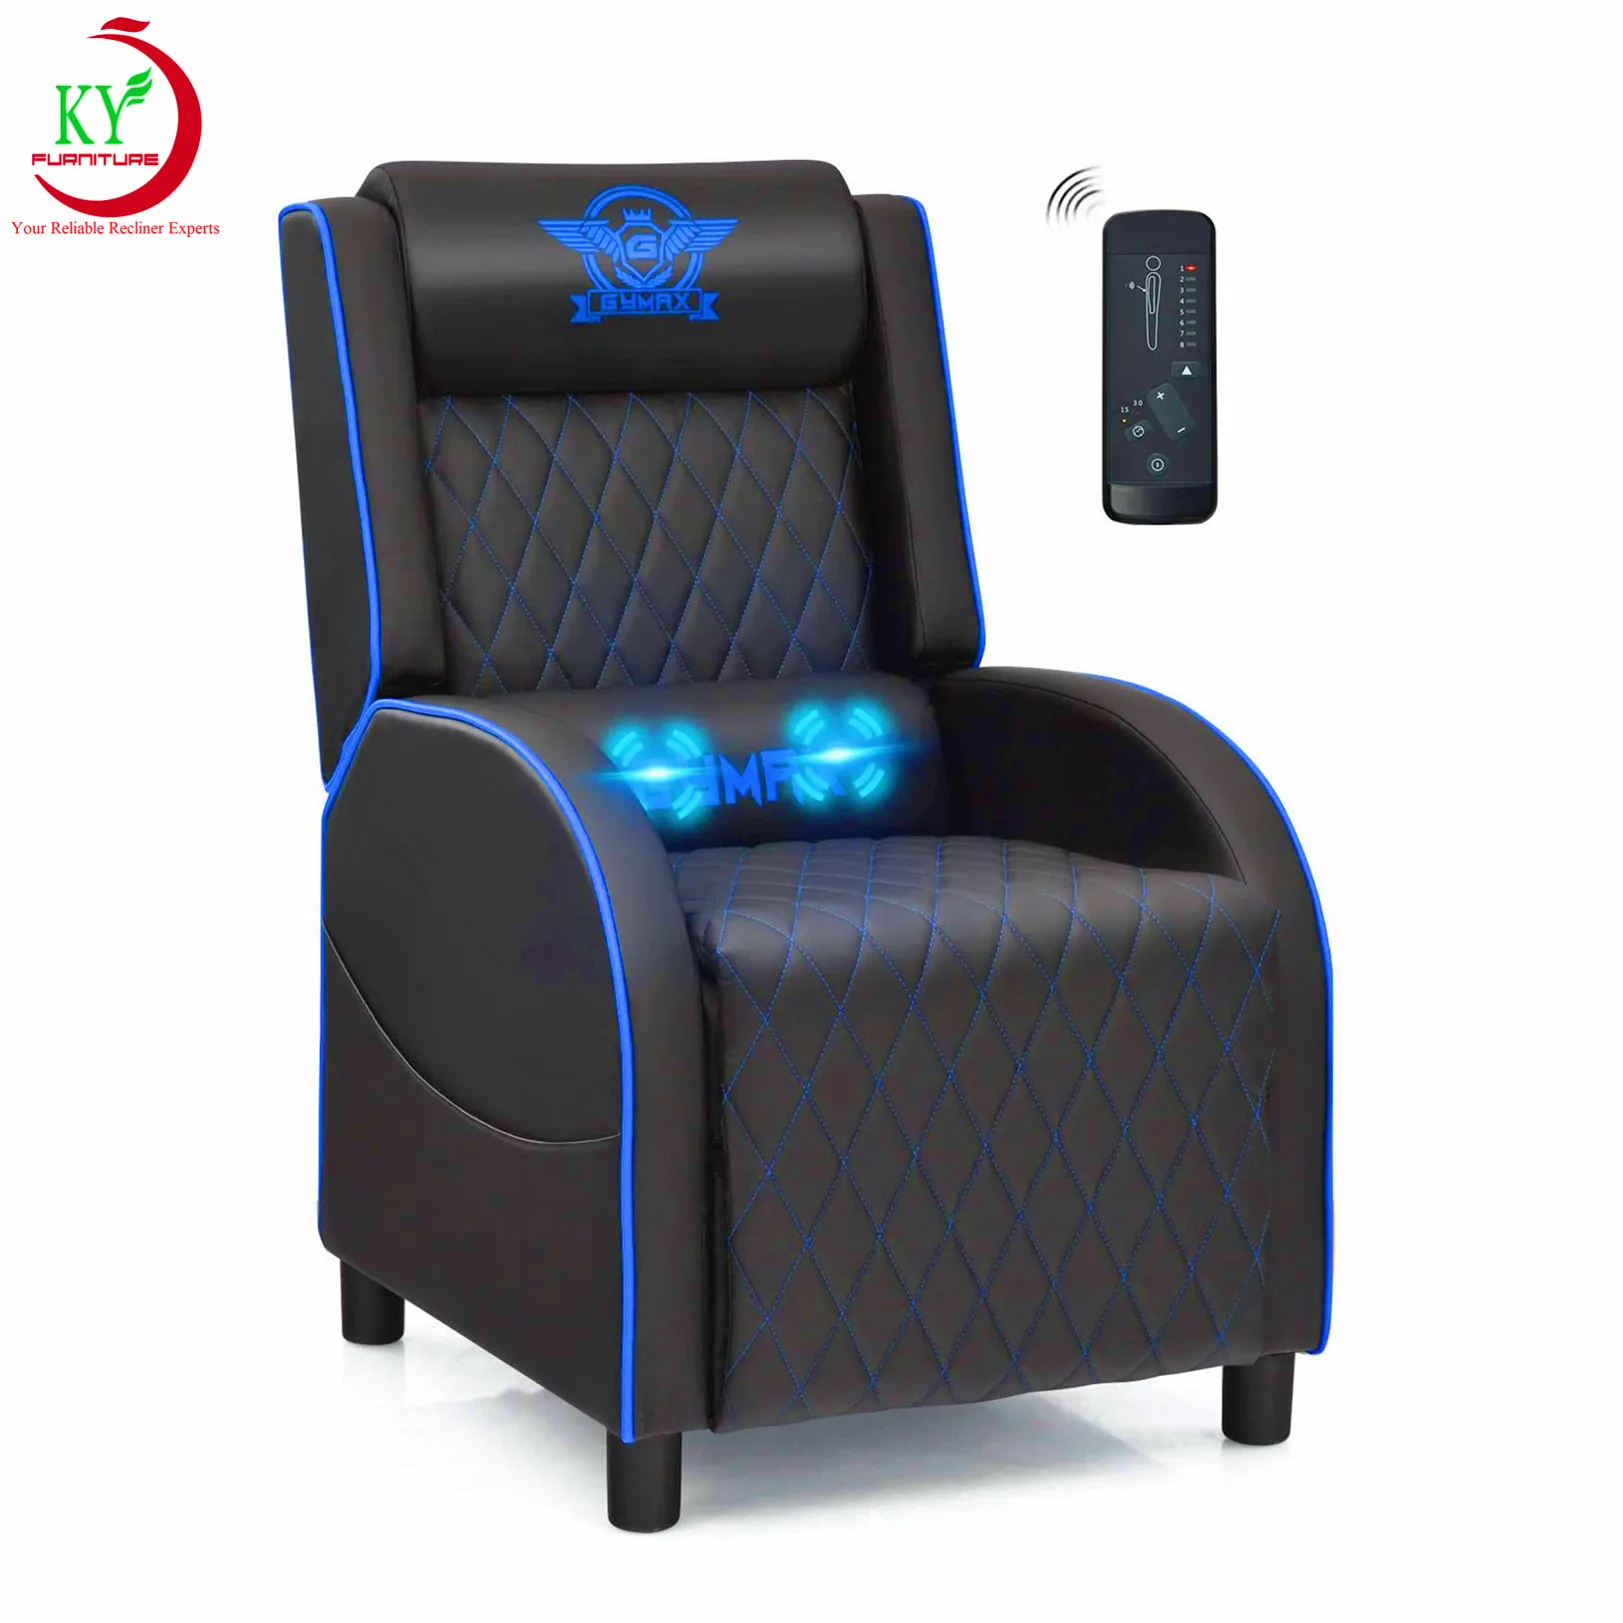 

JKY Furniture Gaming Chair Recliner with Footrest Breathable PU Leather Massage Recliner - Ergonomic Sofa Computer Chair